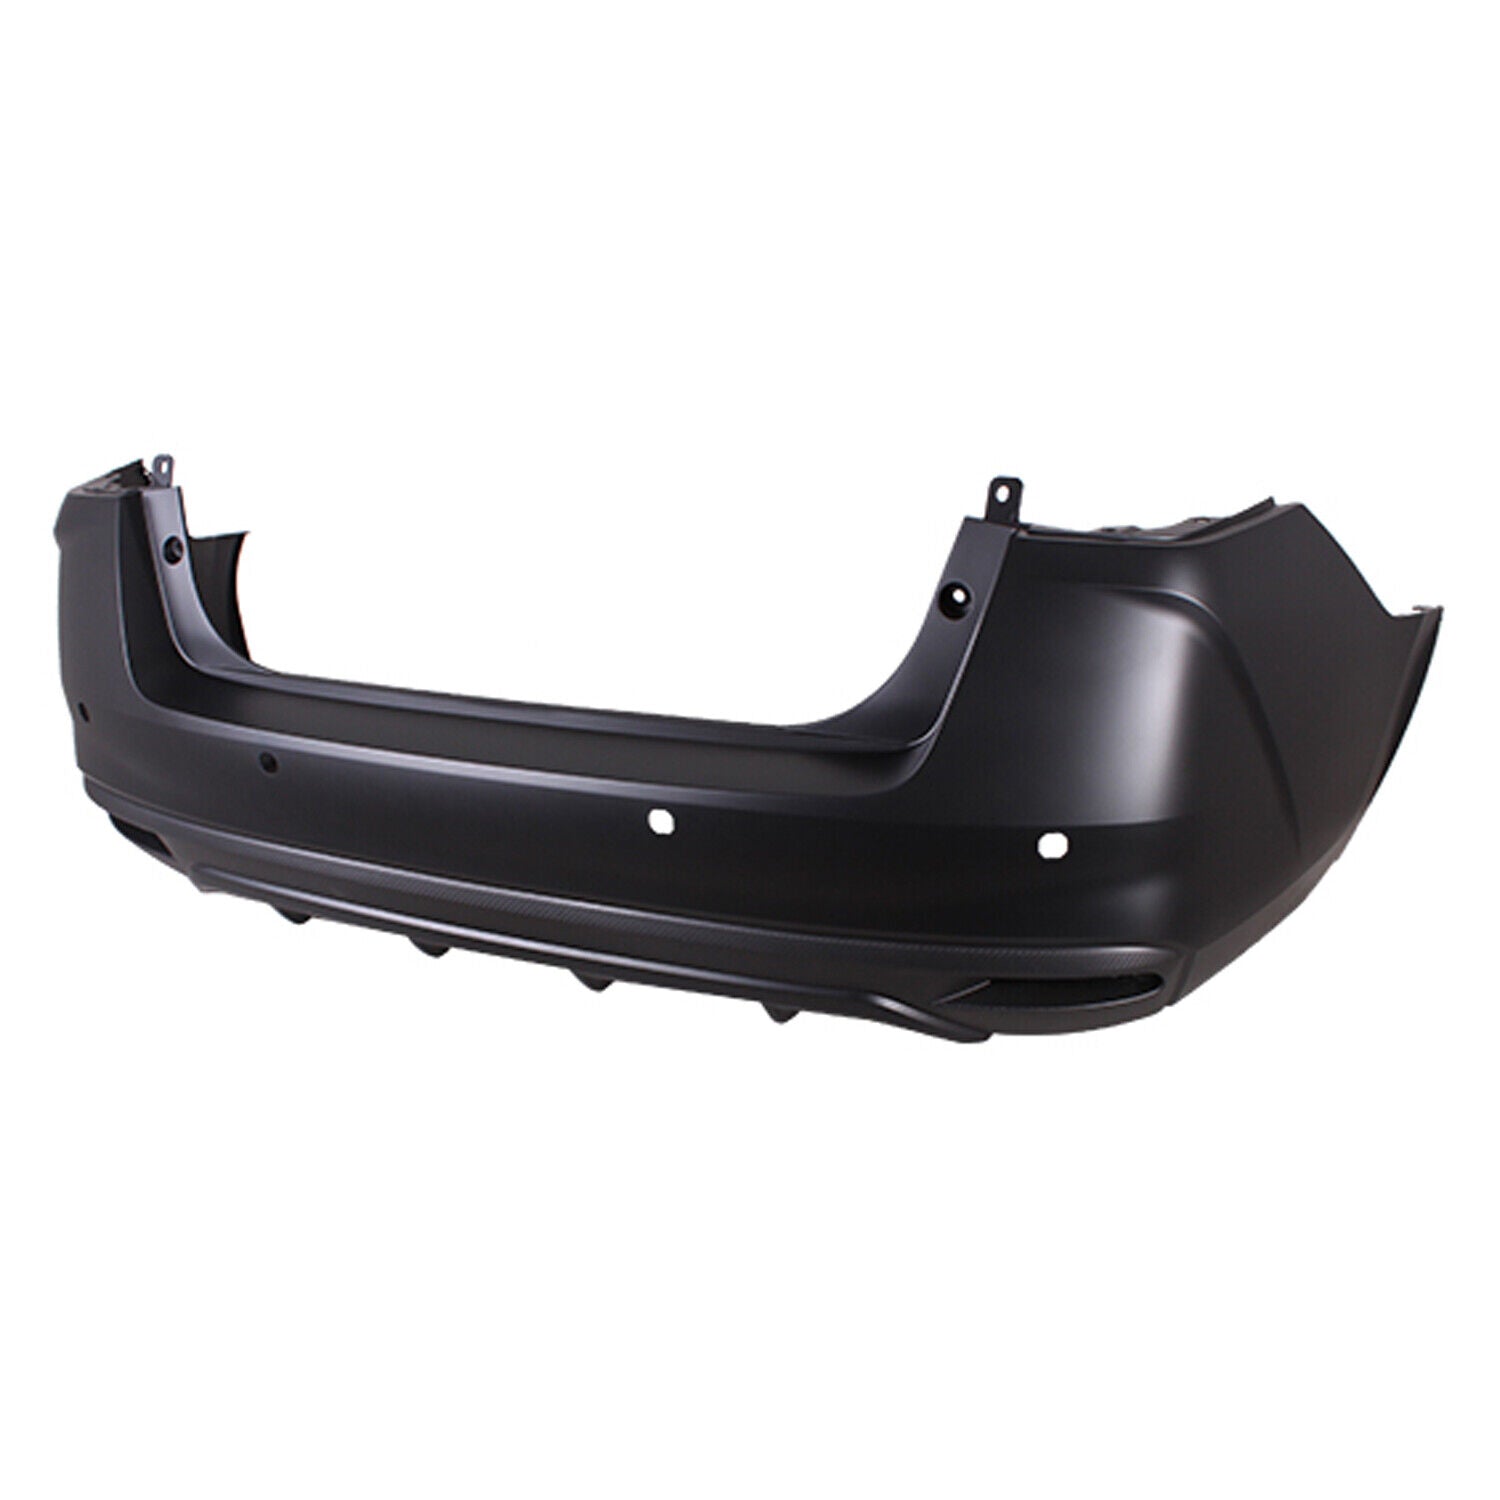 2020-2021 NISSAN VERSA; Rear Bumper Cover; Painted to Match